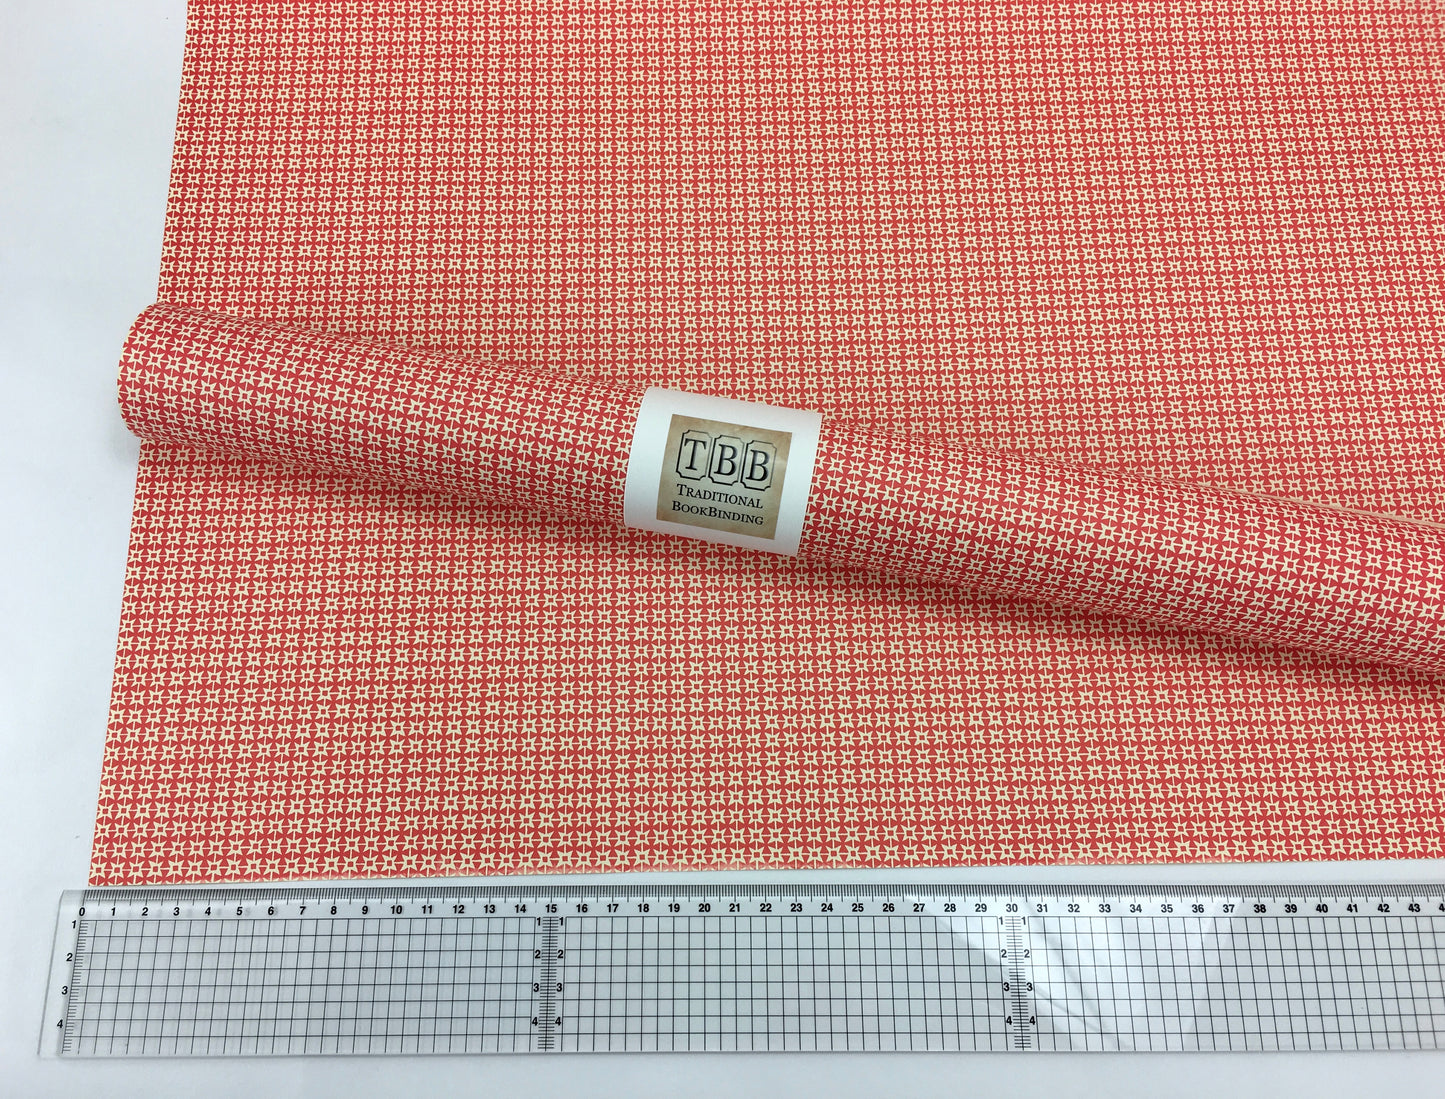 TBBIDP3A- Italian Decorative Paper- 100 GSM Thick paper for bookbinding- Suitable for book covers and end sheets